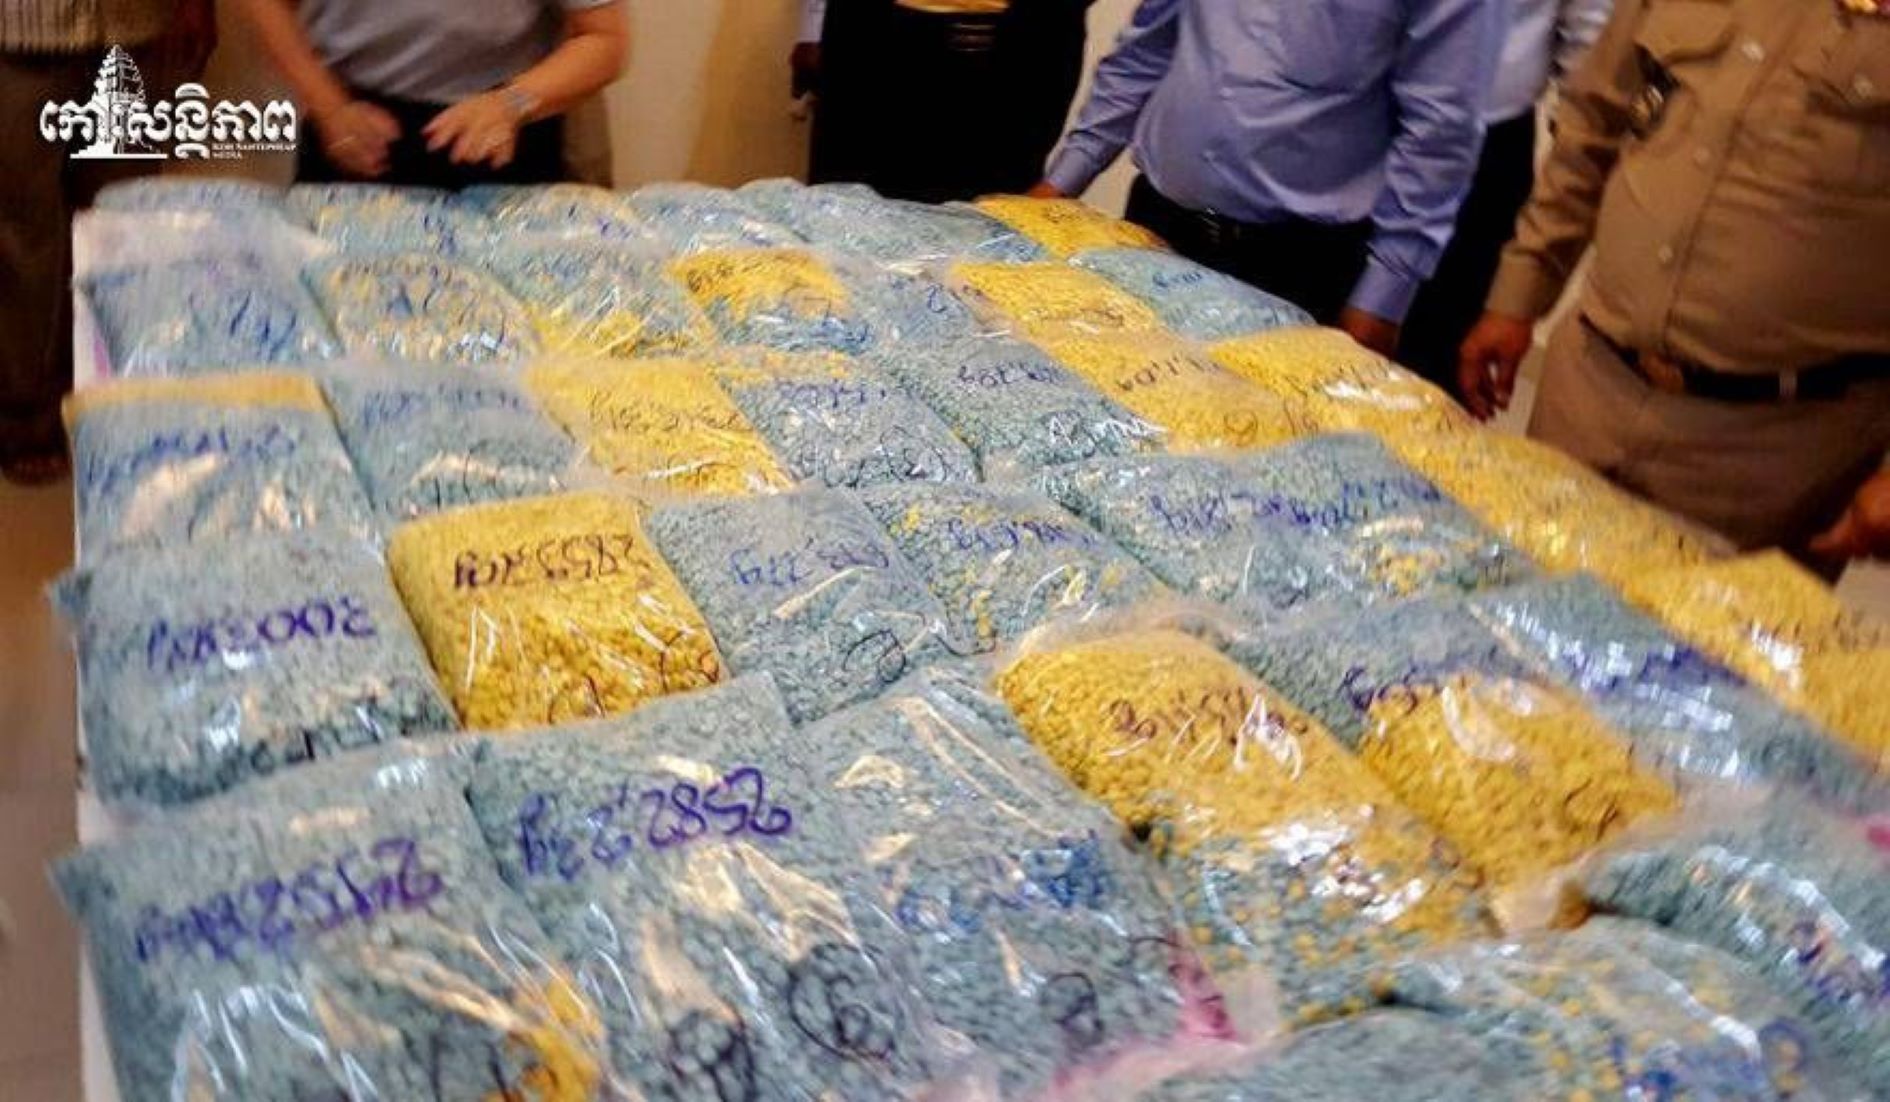 Cambodia Arrested Two Foreigners For Trafficking Over 40 Kg Of Illicit Drugs: Police